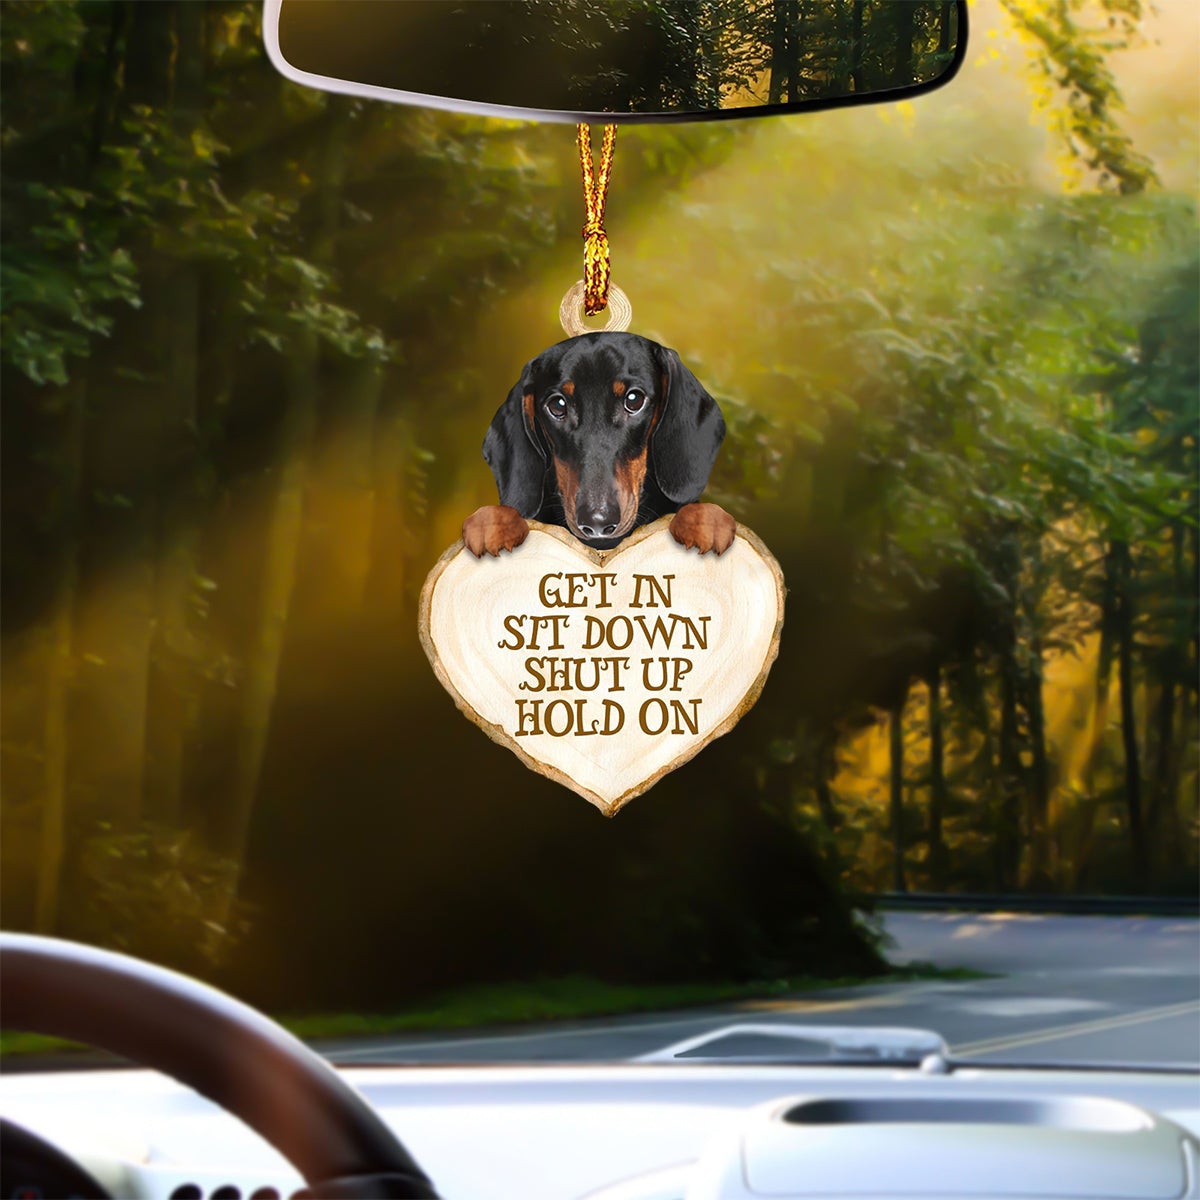 Dachshund 2 Heart Shape Get In Car Hanging Ornament